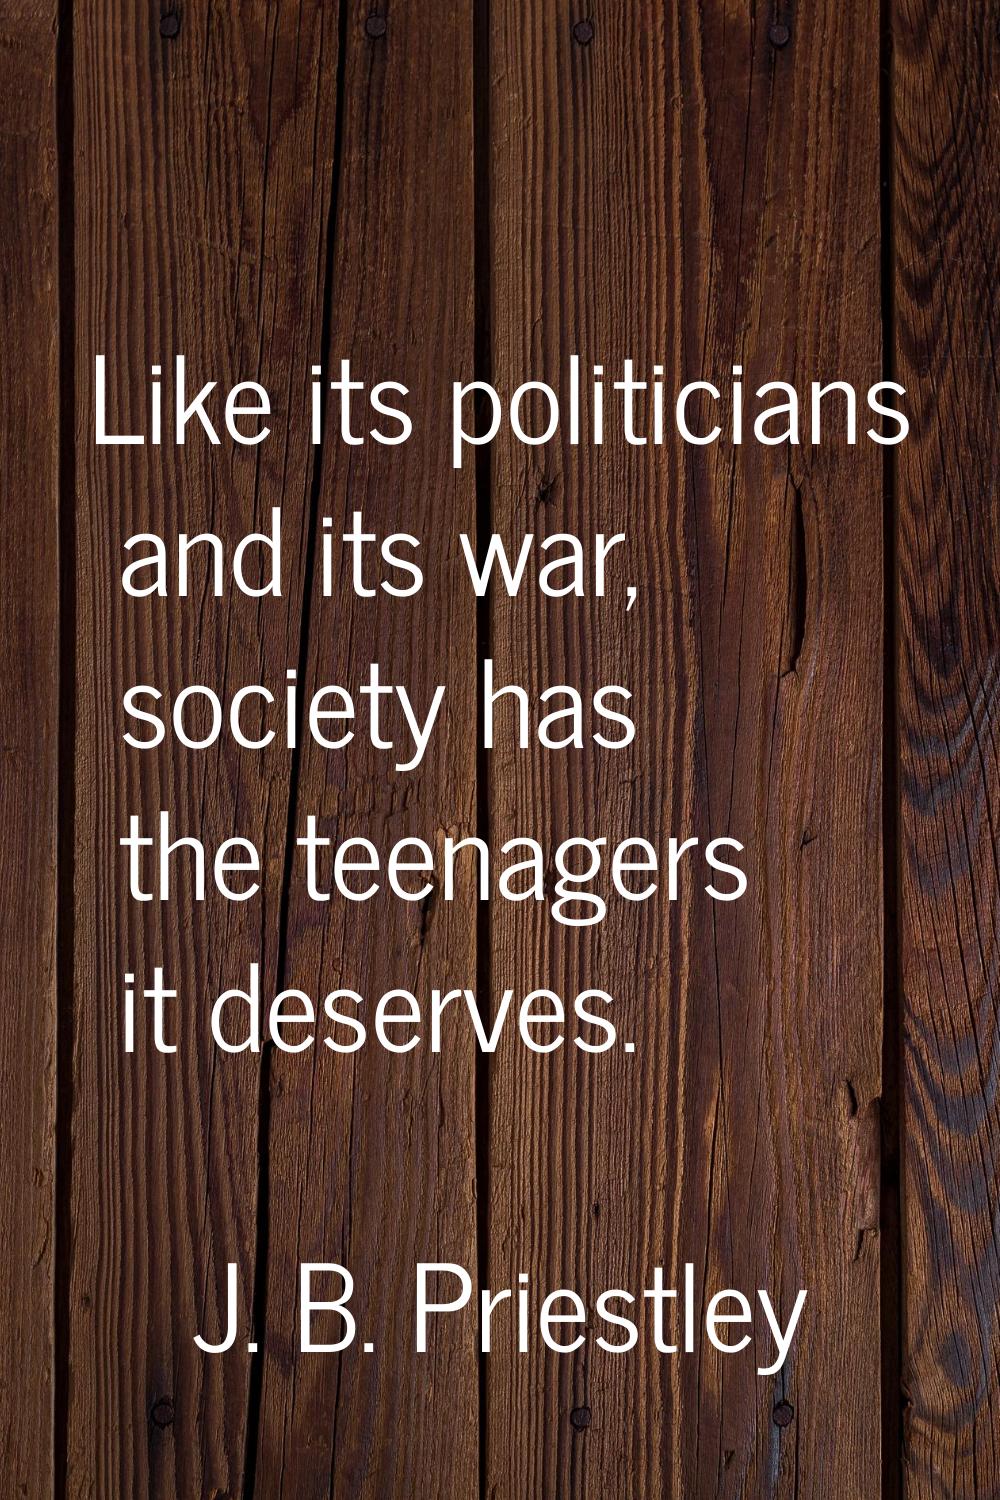 Like its politicians and its war, society has the teenagers it deserves.